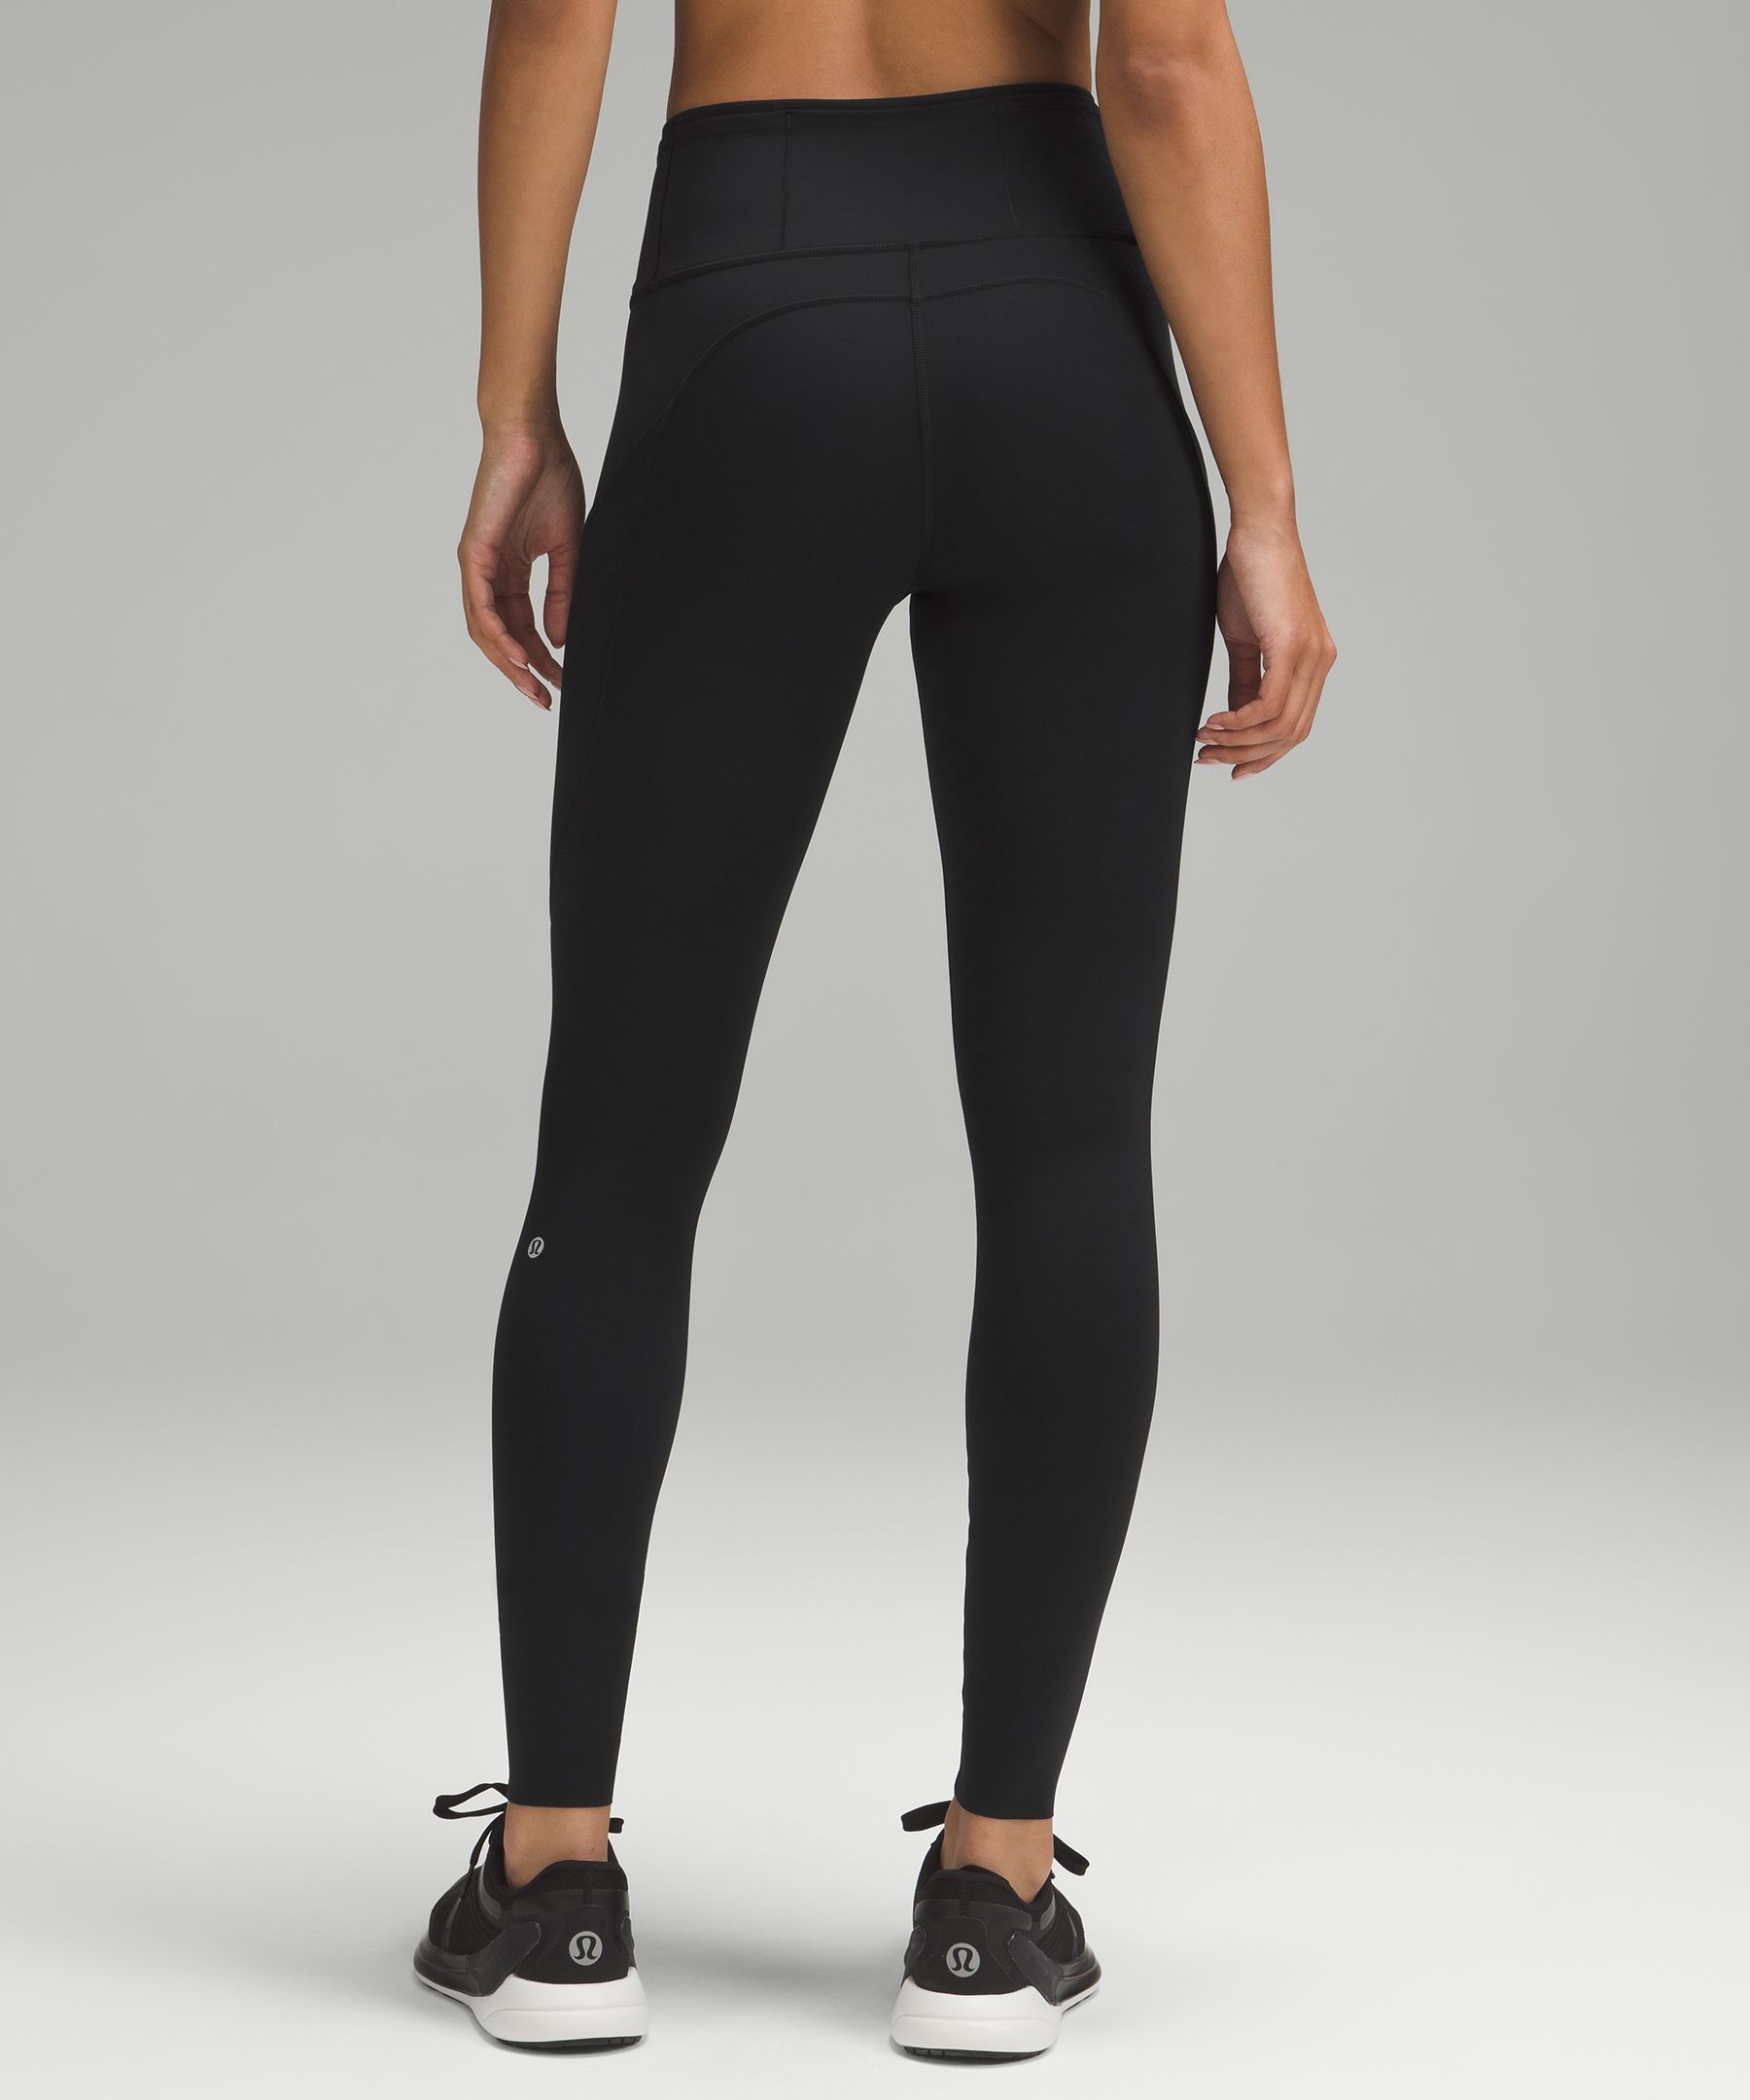 fast and free hr tight 25 lululemon